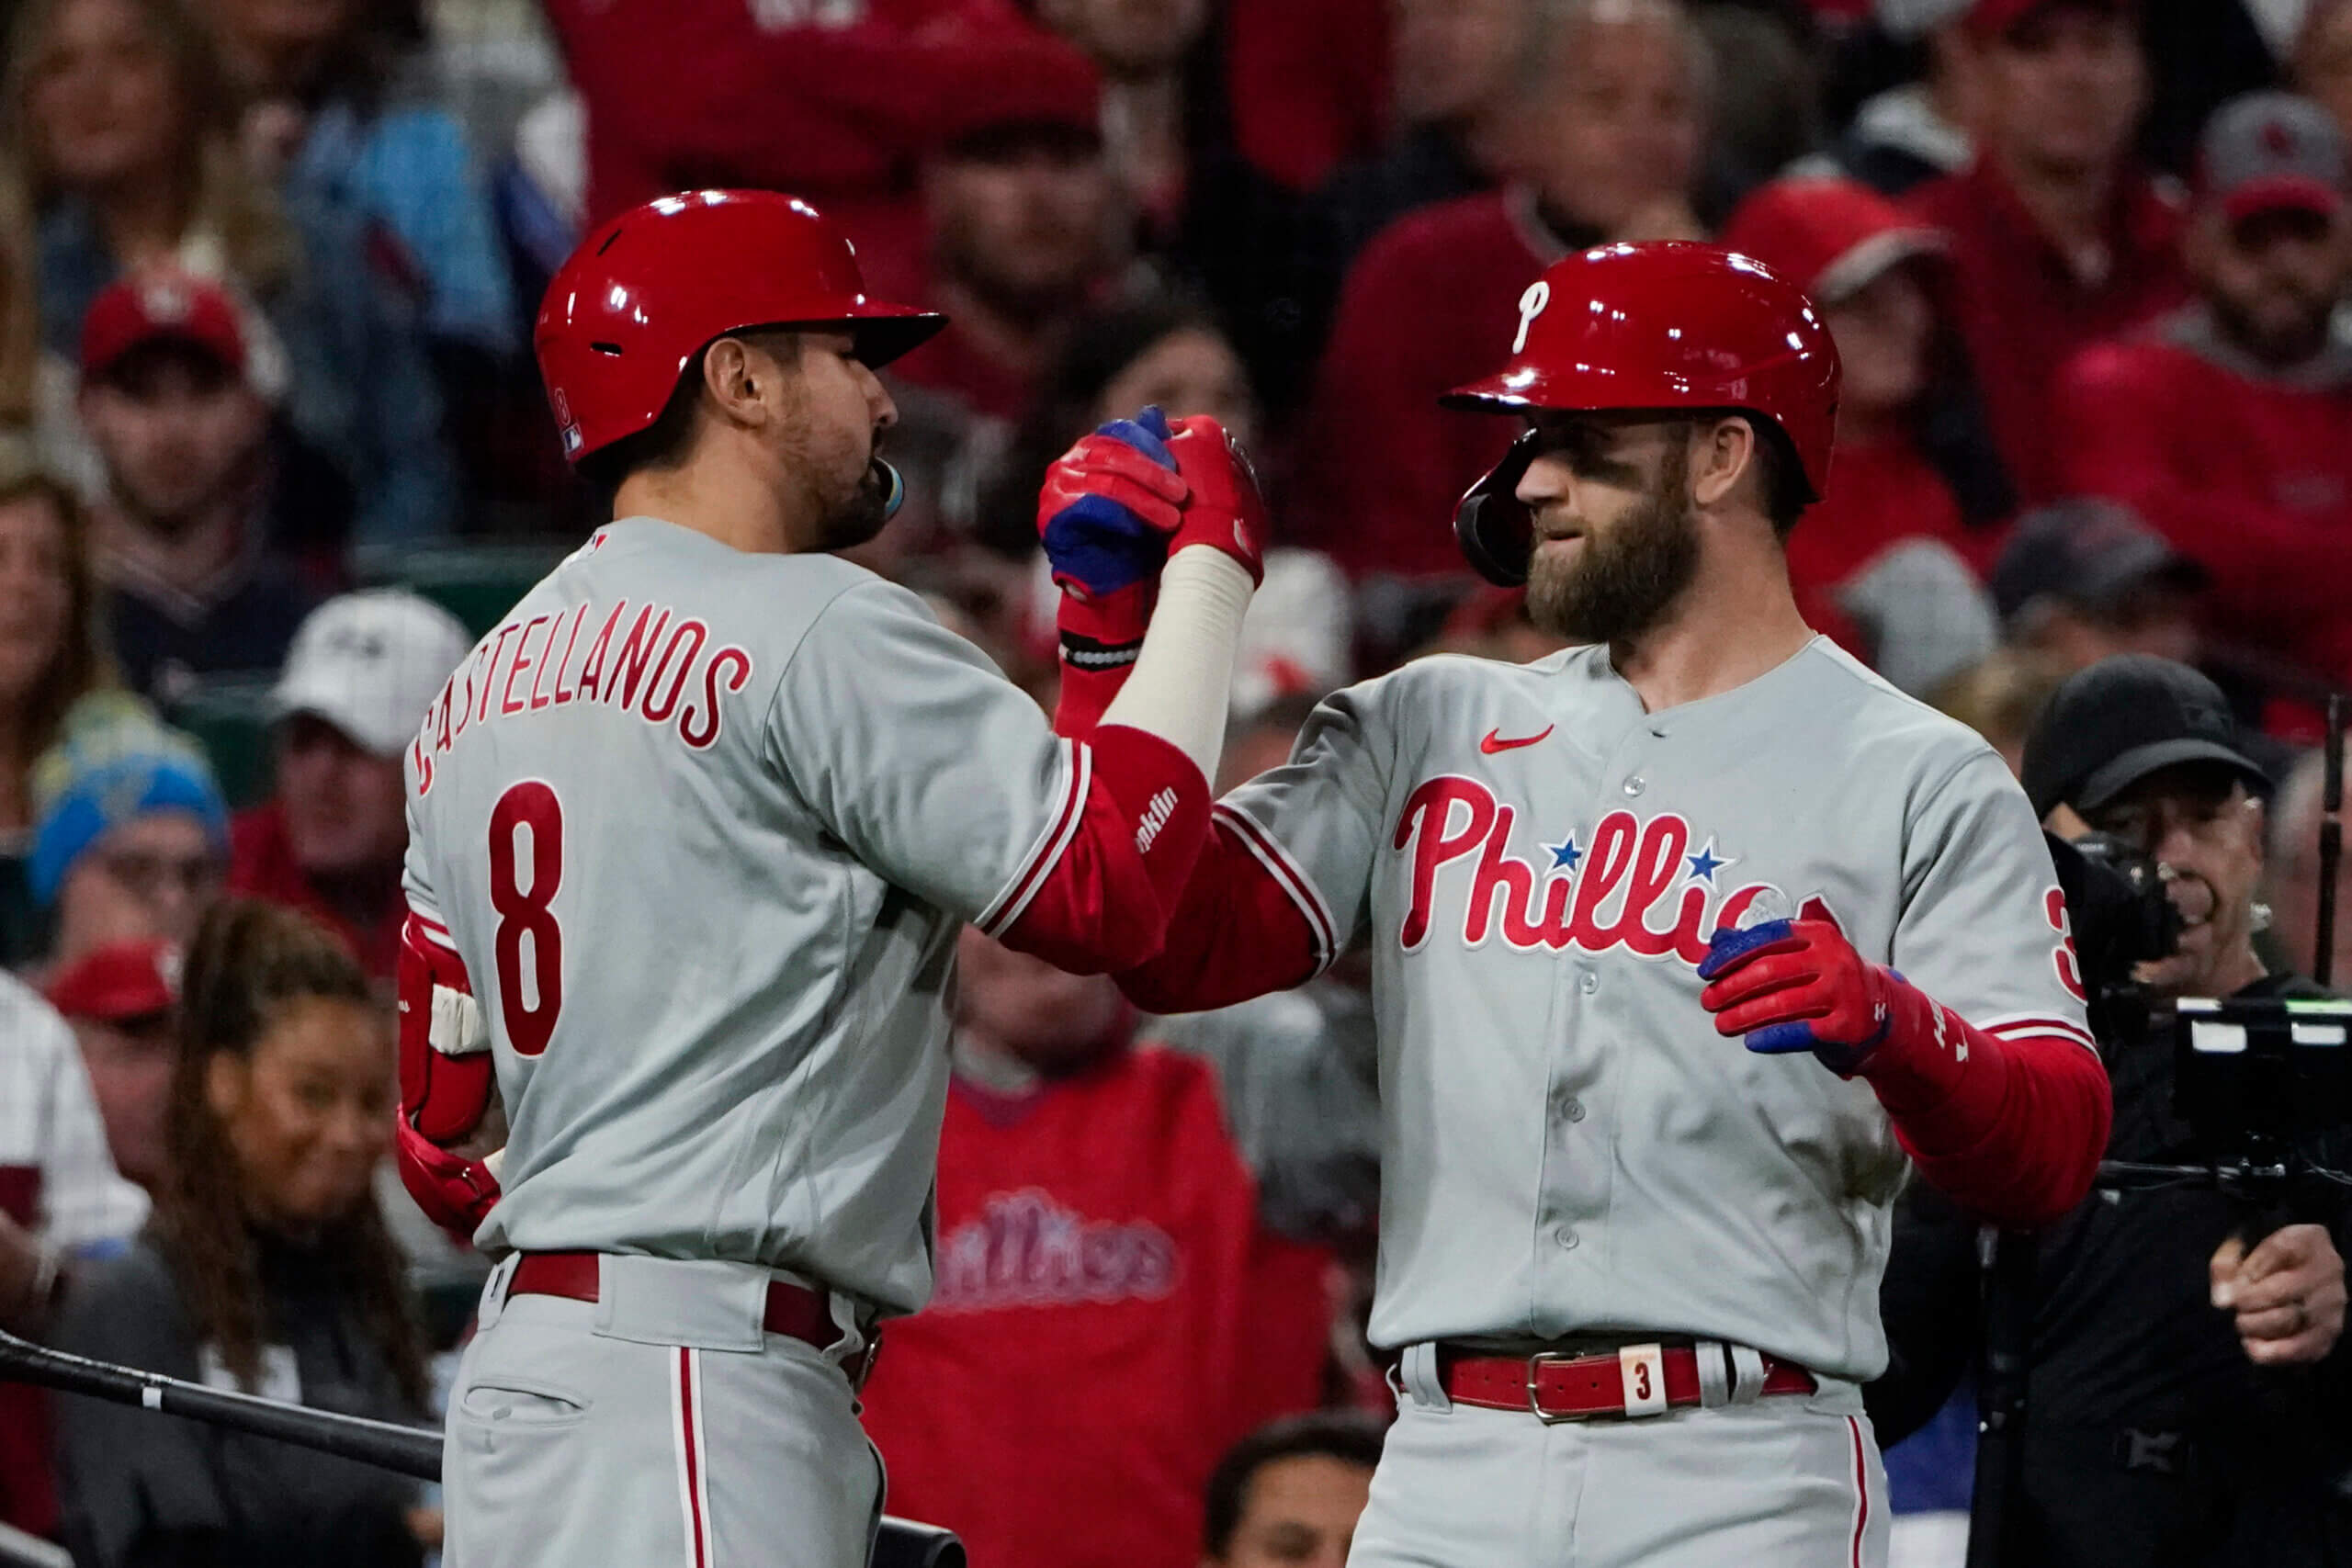 The Fearless Phillies are just 8 wins away from etching their names in the  history books – Philly Sports